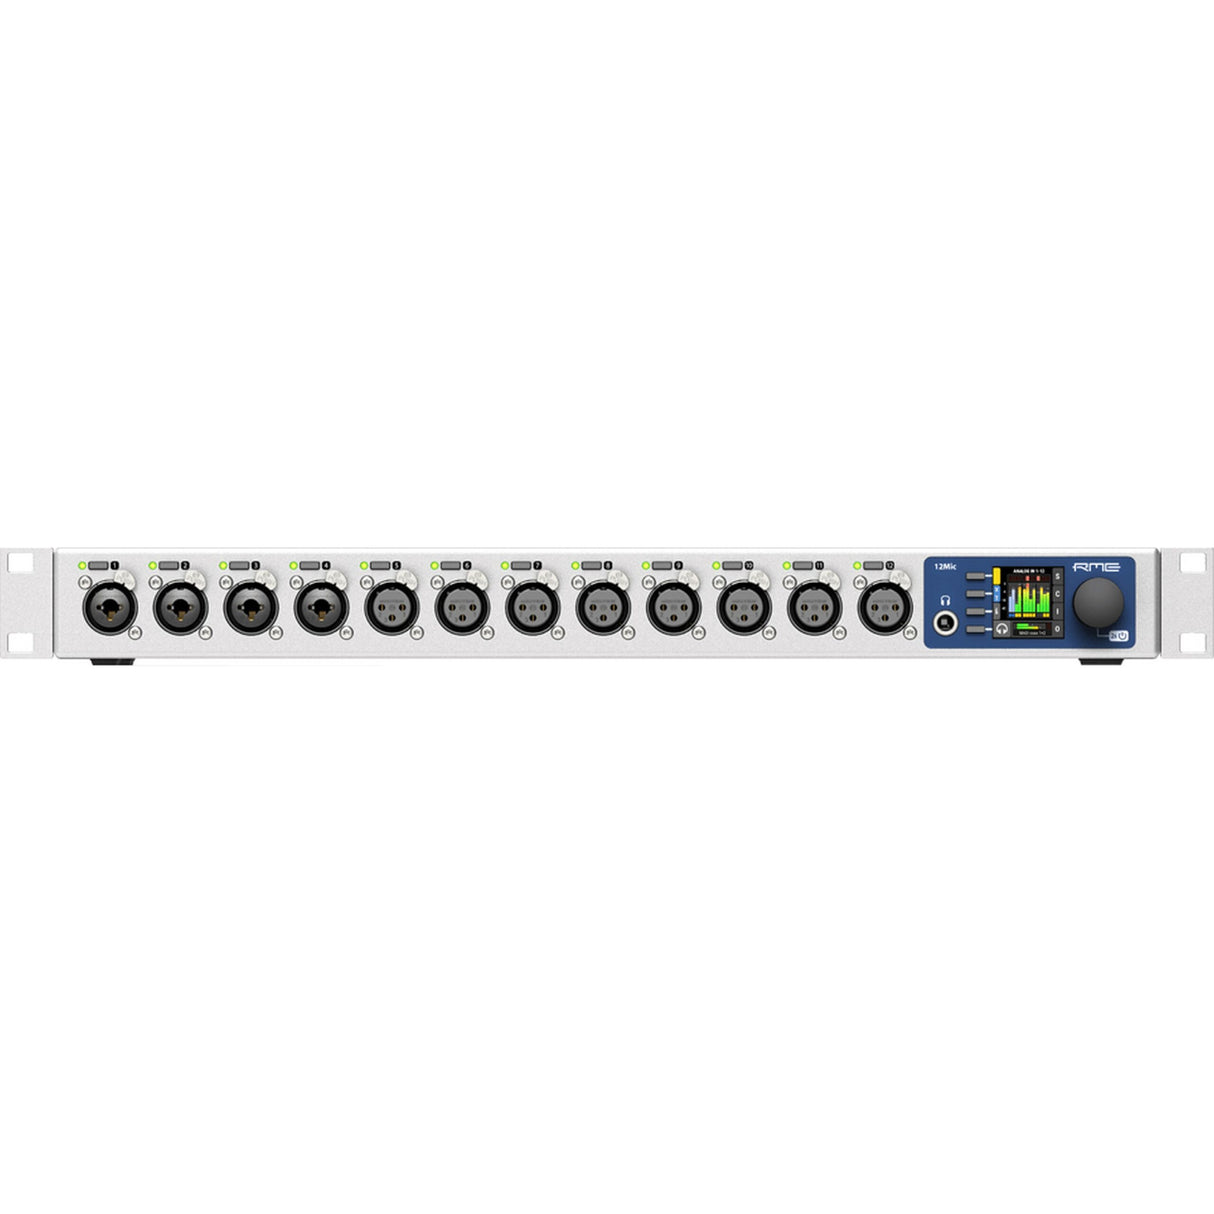 RME 12 Mic 12-Channel Digitally Controlled Microphone Preamplifier with AVB and MADI